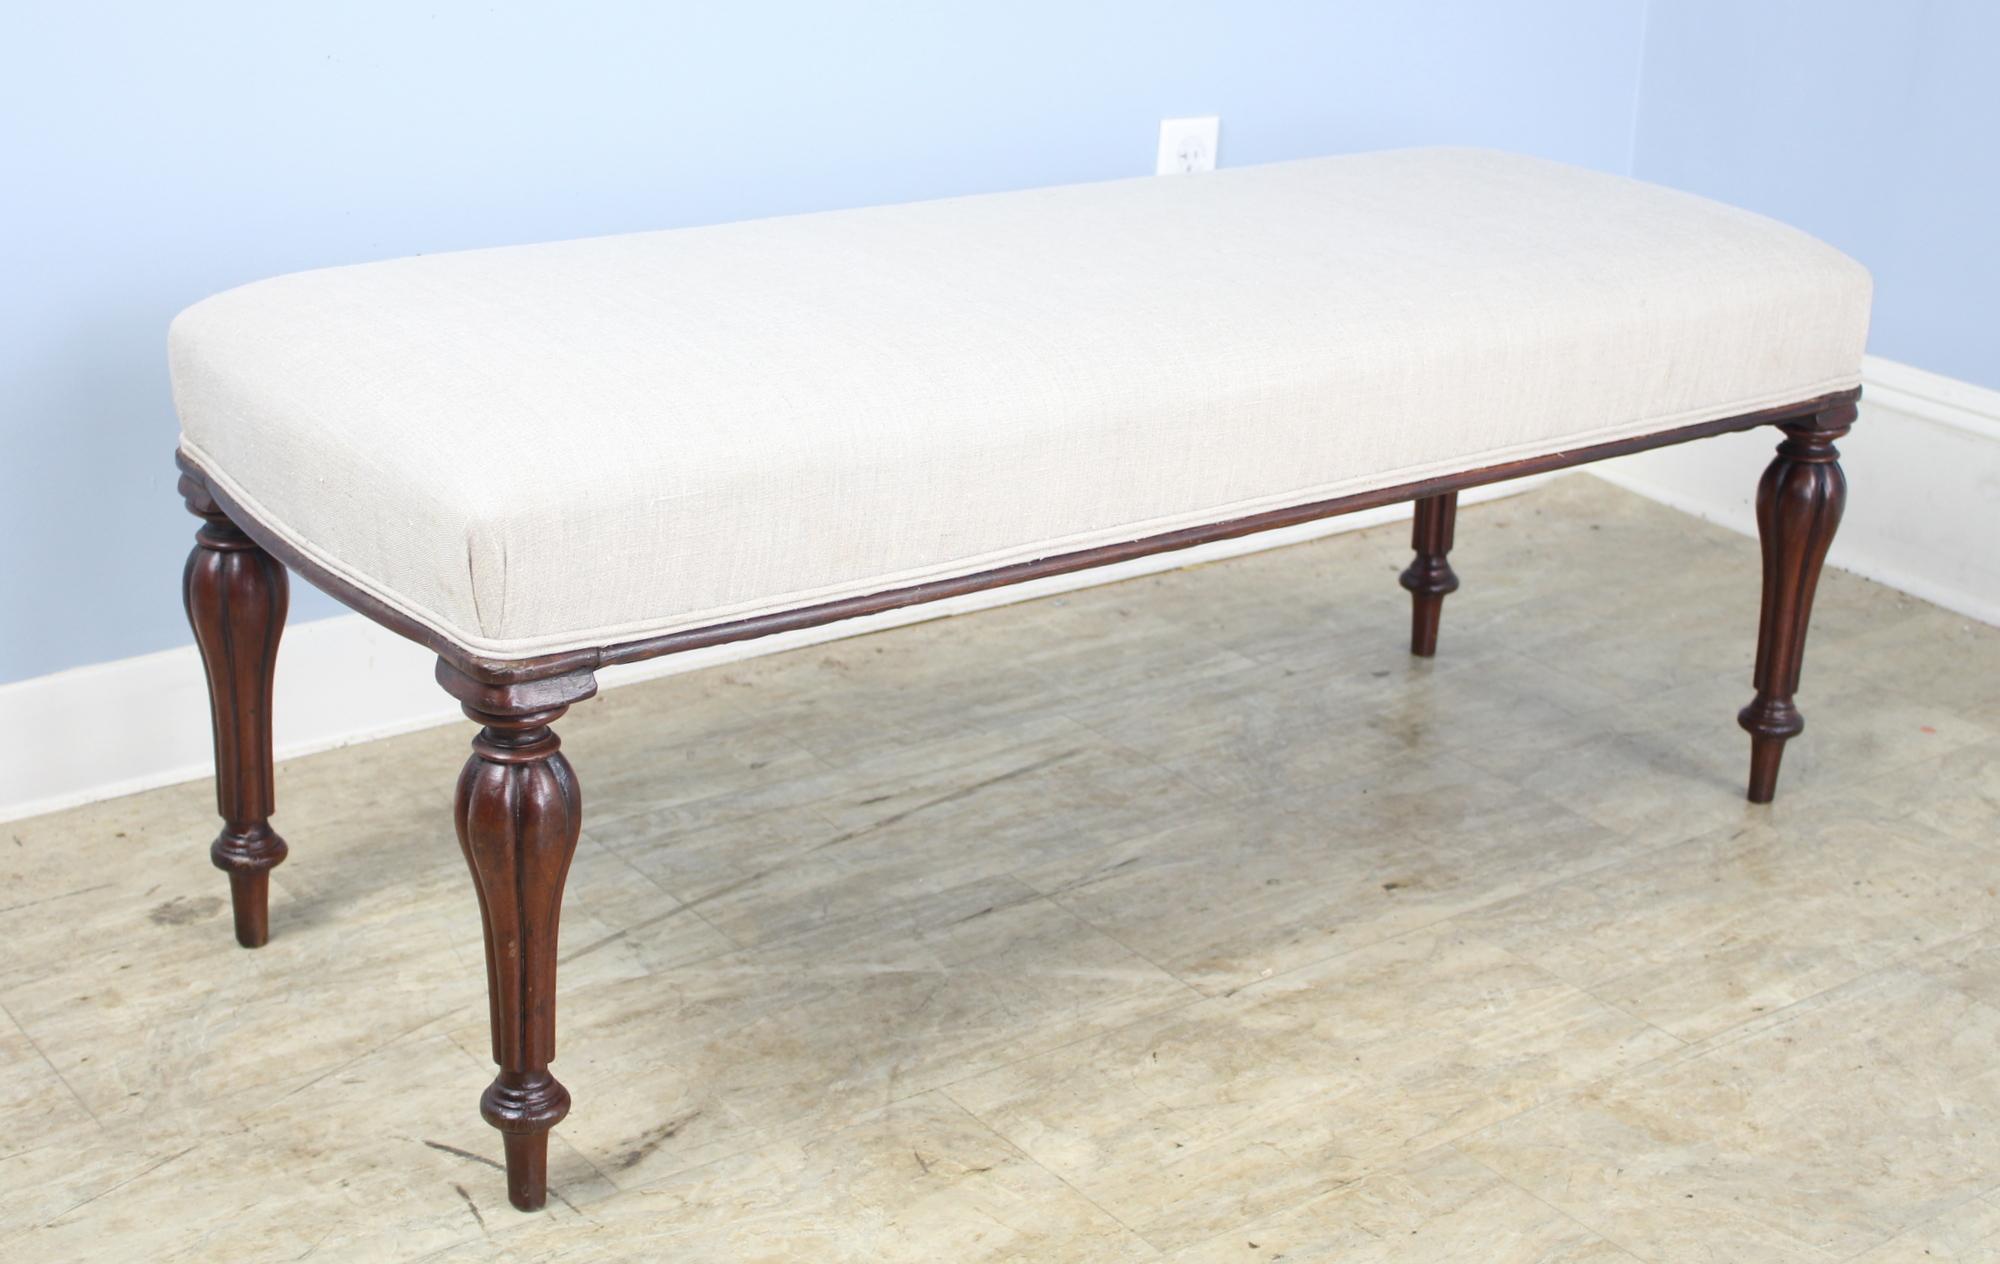 An elegant stool newly covered in French beige linen, with decorative piping at the edge of the seat. Graceful and well-shaped ends. Constructed with mahogany legs, circa 1830 that are well-carved and sturdy. Very good sitting-height, comfortable